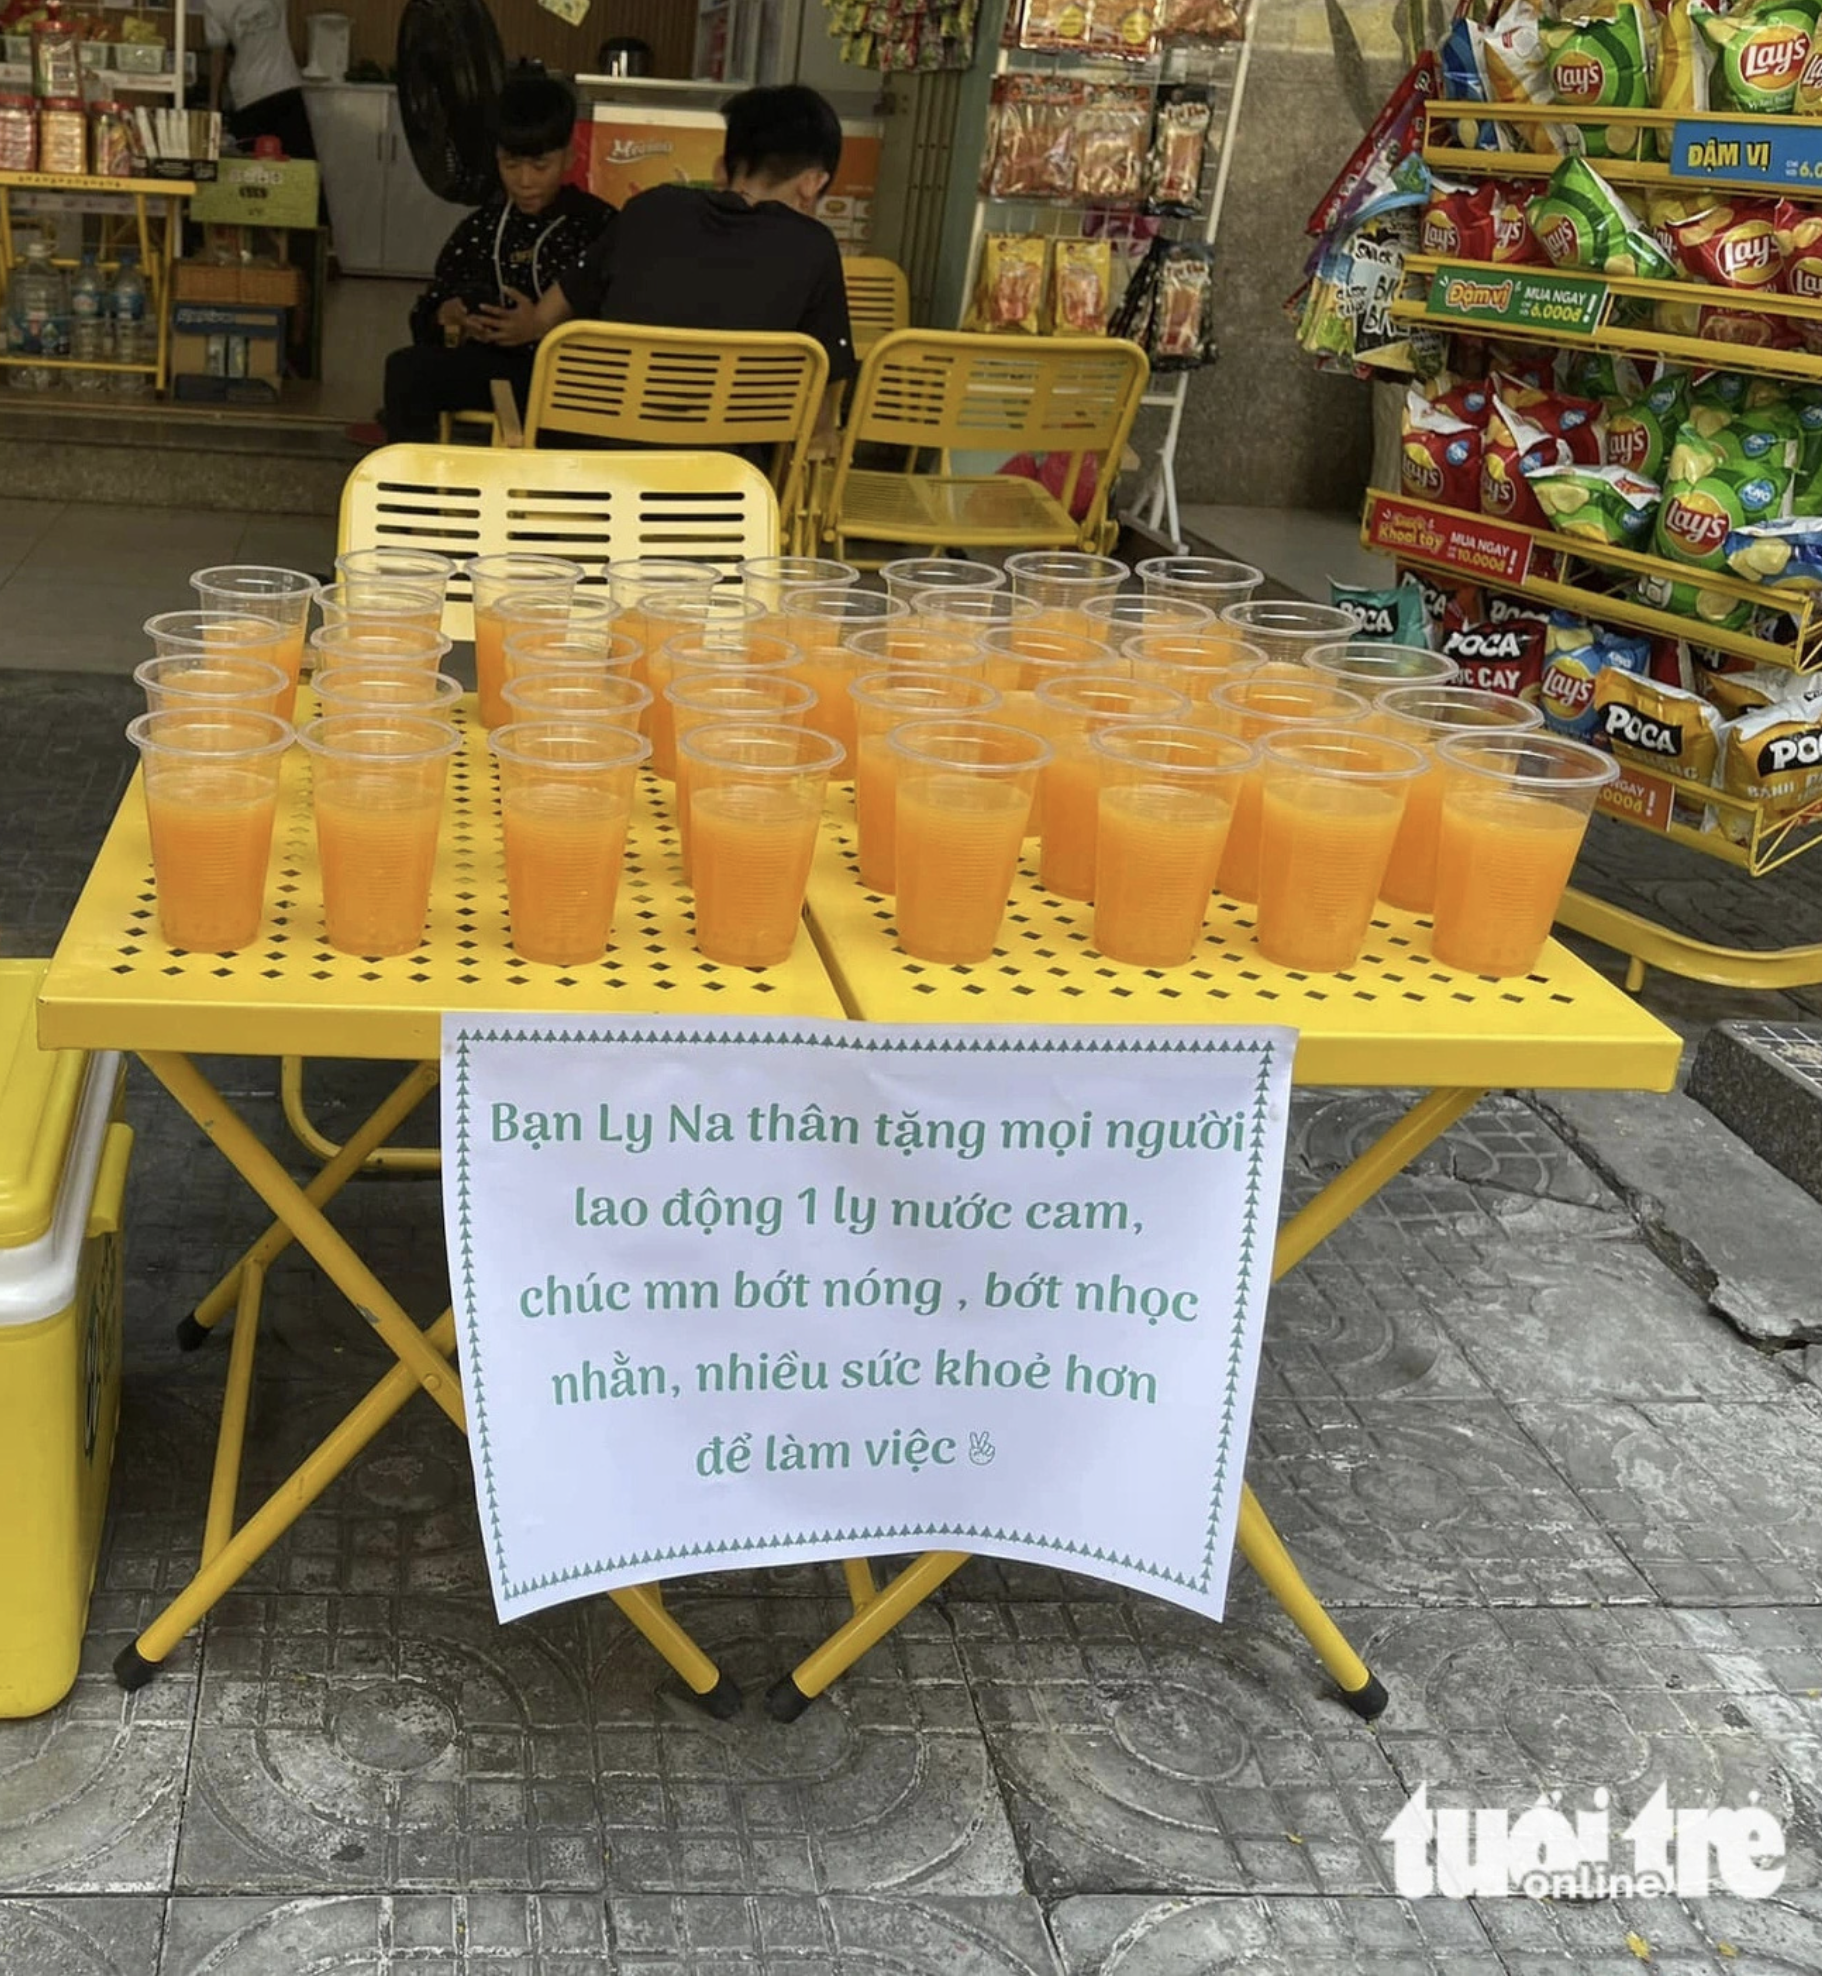 Free glasses of iced orange juice warm hearts, cool down outdoor workers in Da Nang